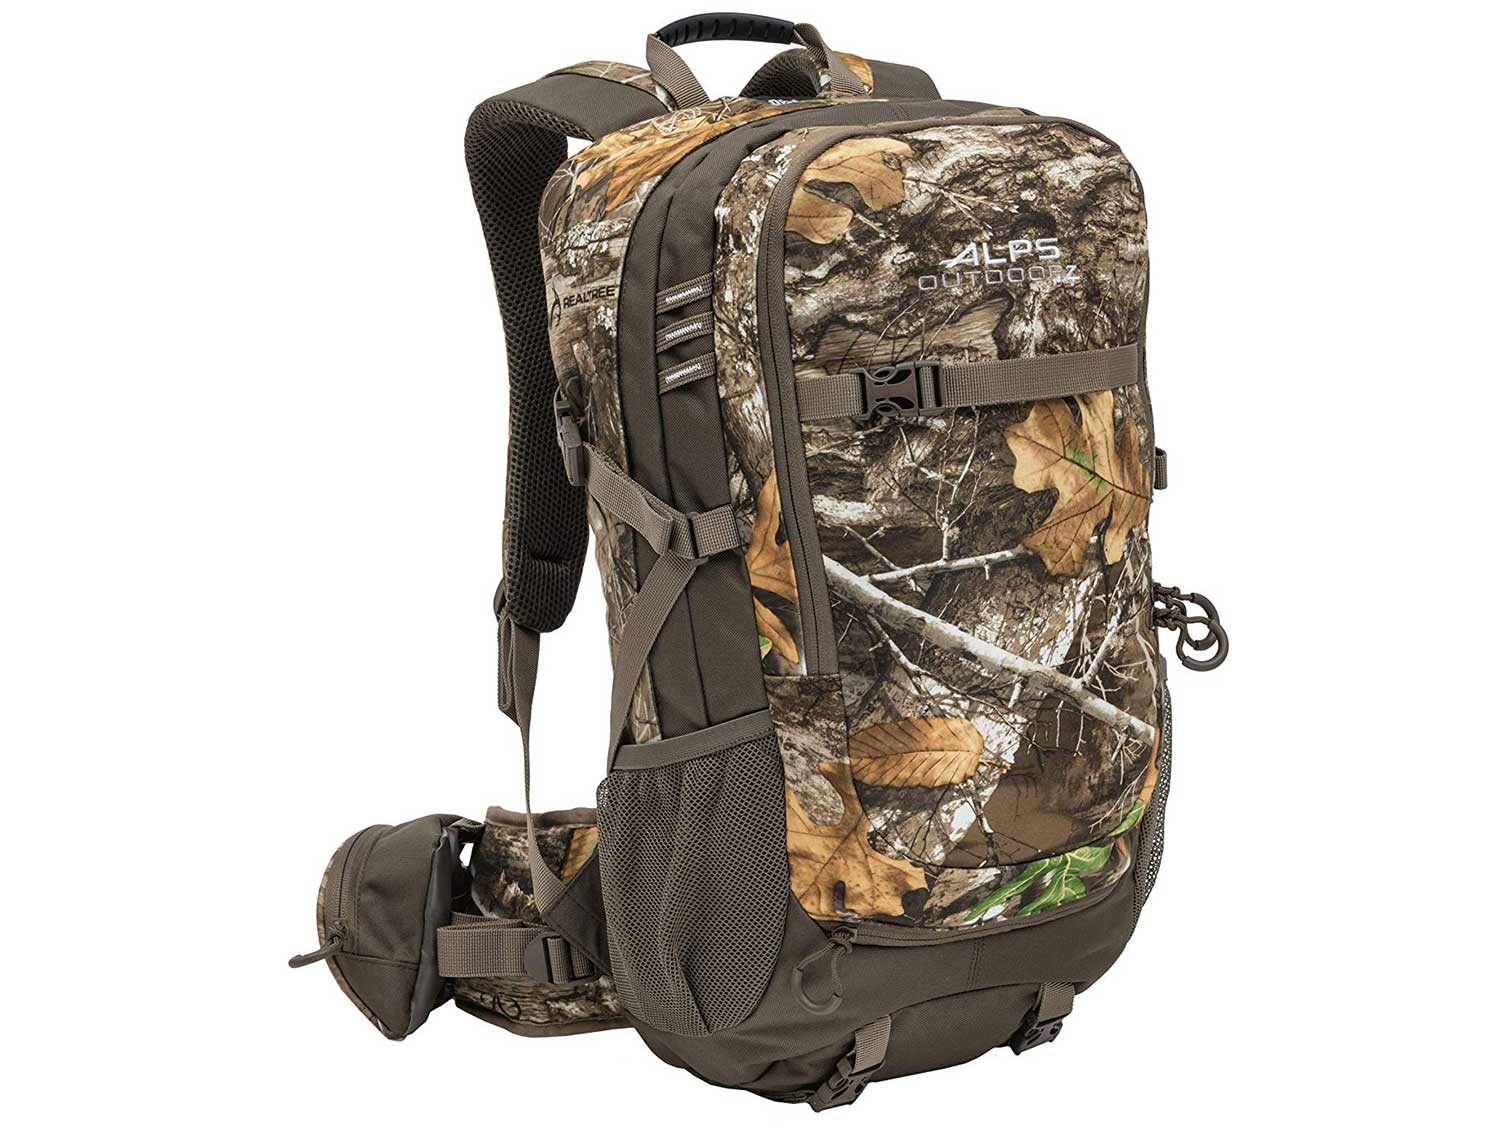 ALPS Outdoorz Huntress Hunting Pack